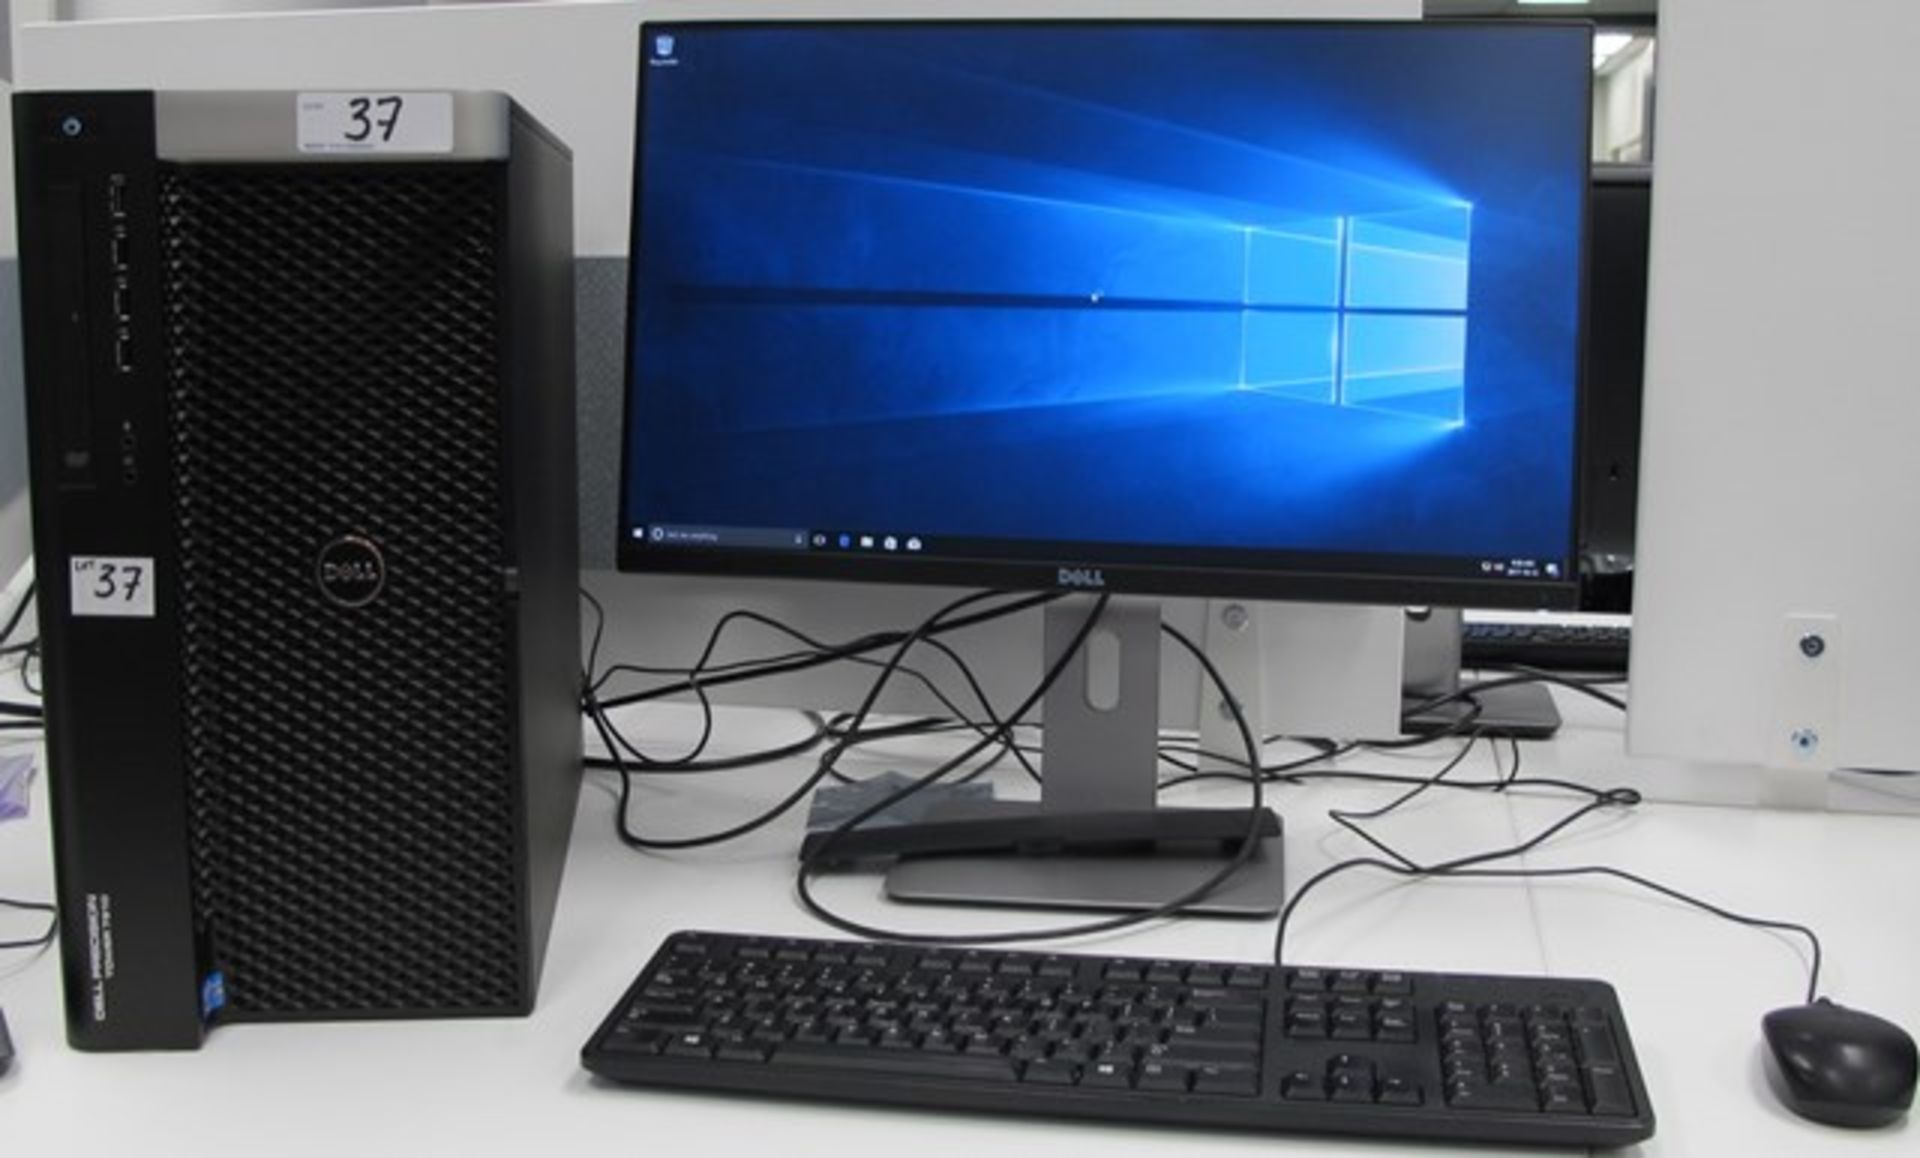 DELL PRECISION 7910 TOWER COMPUTER W/DELL MONITOR, KEYBOARD, MOUSE (WINDOWS 7)